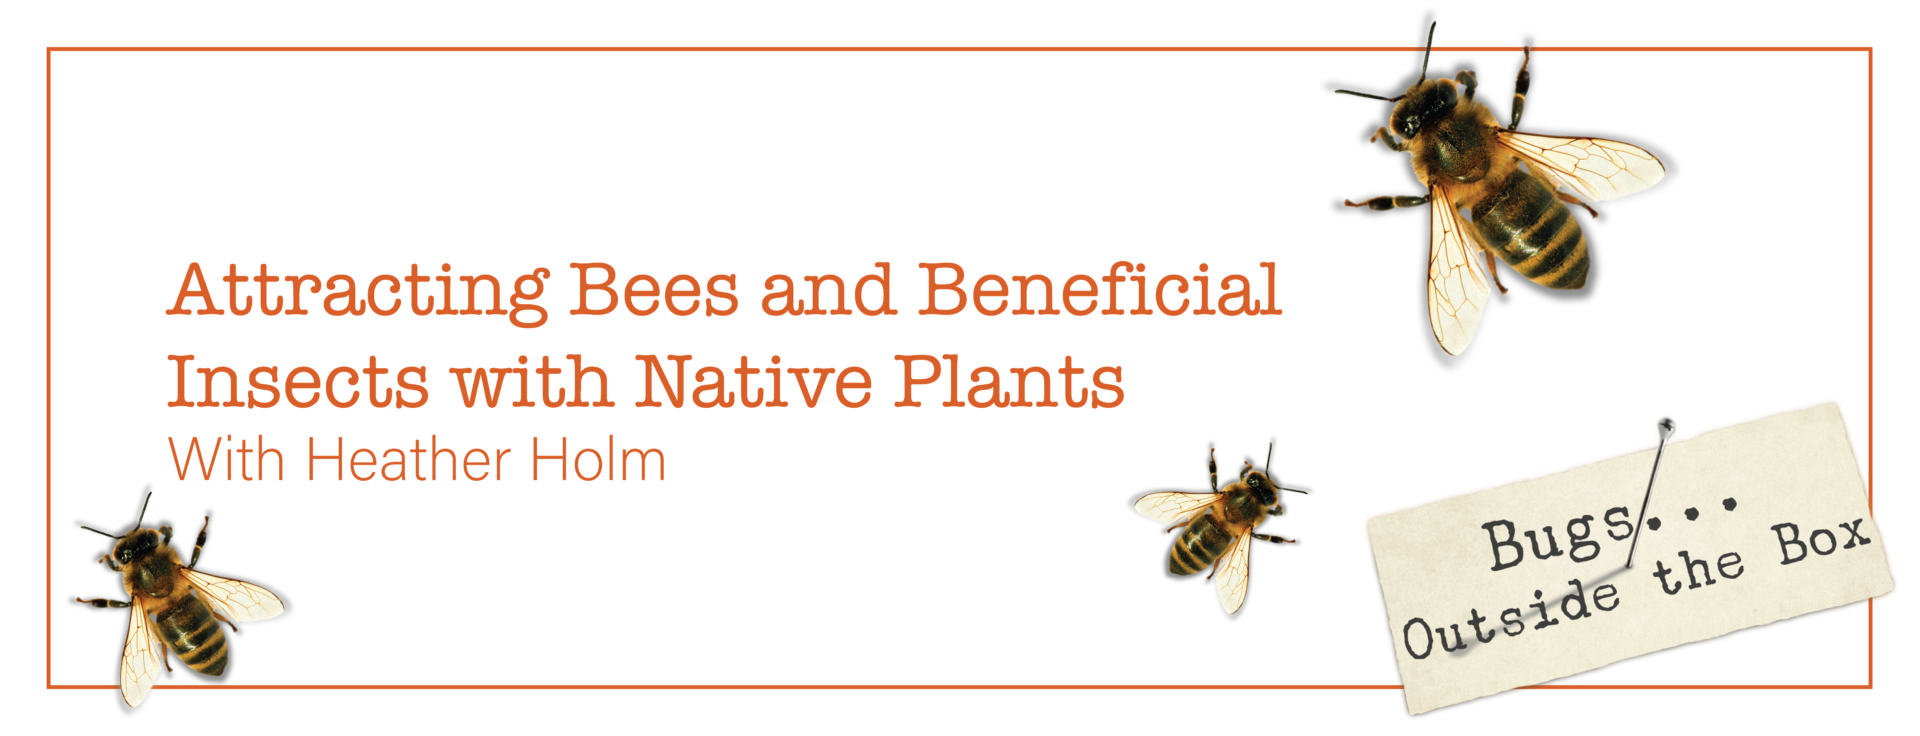 text: Attracting Bees and Beneficial Insects with Native Plants with Heather Holm